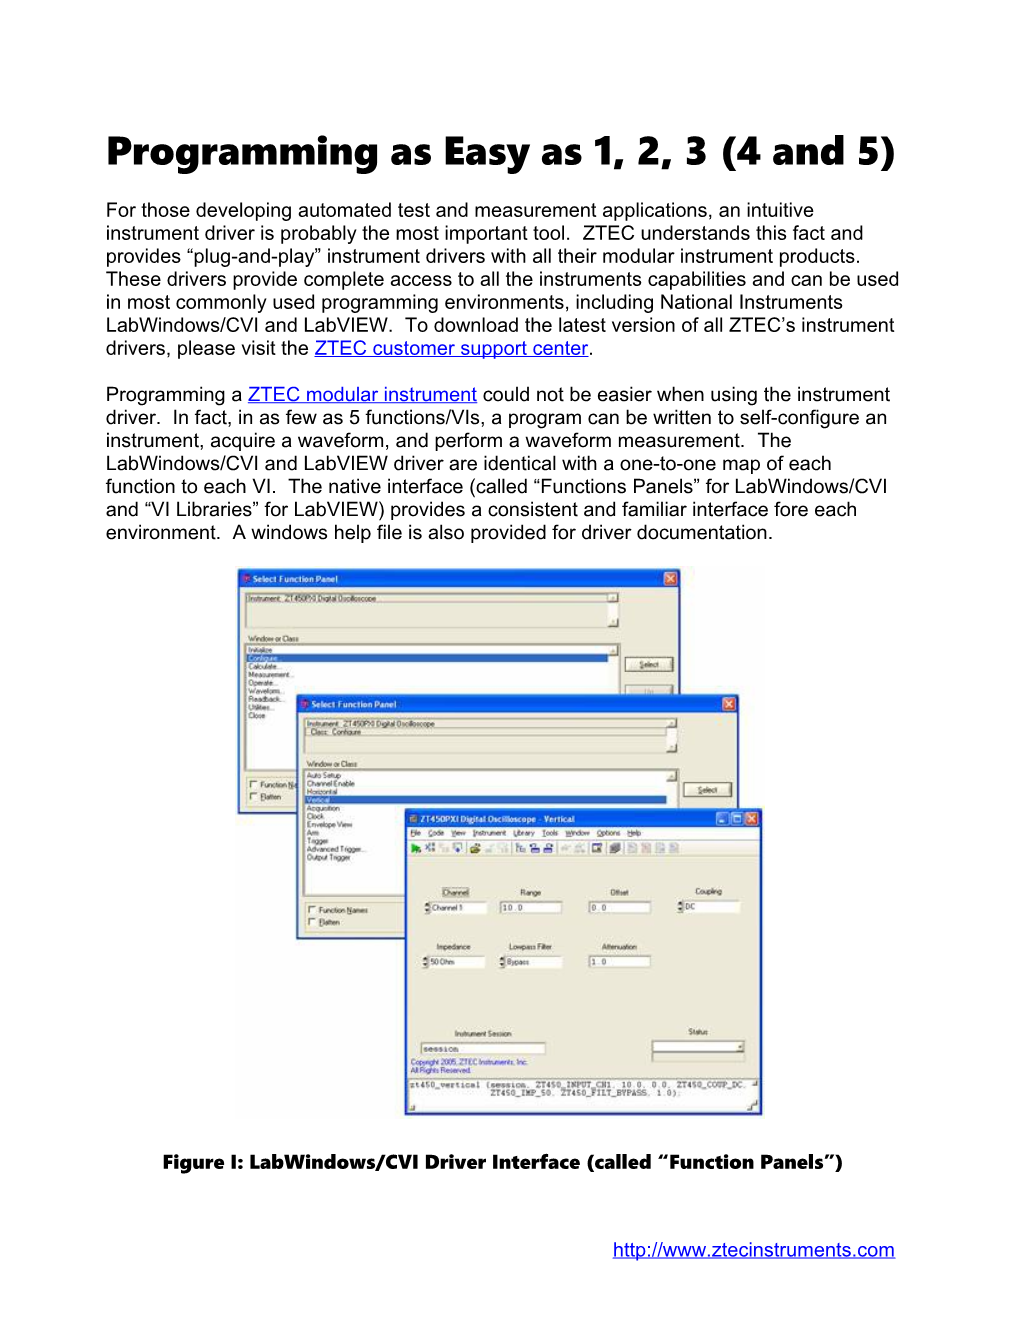 Programming As Easy As 1, 2, 3 (4 and 5)